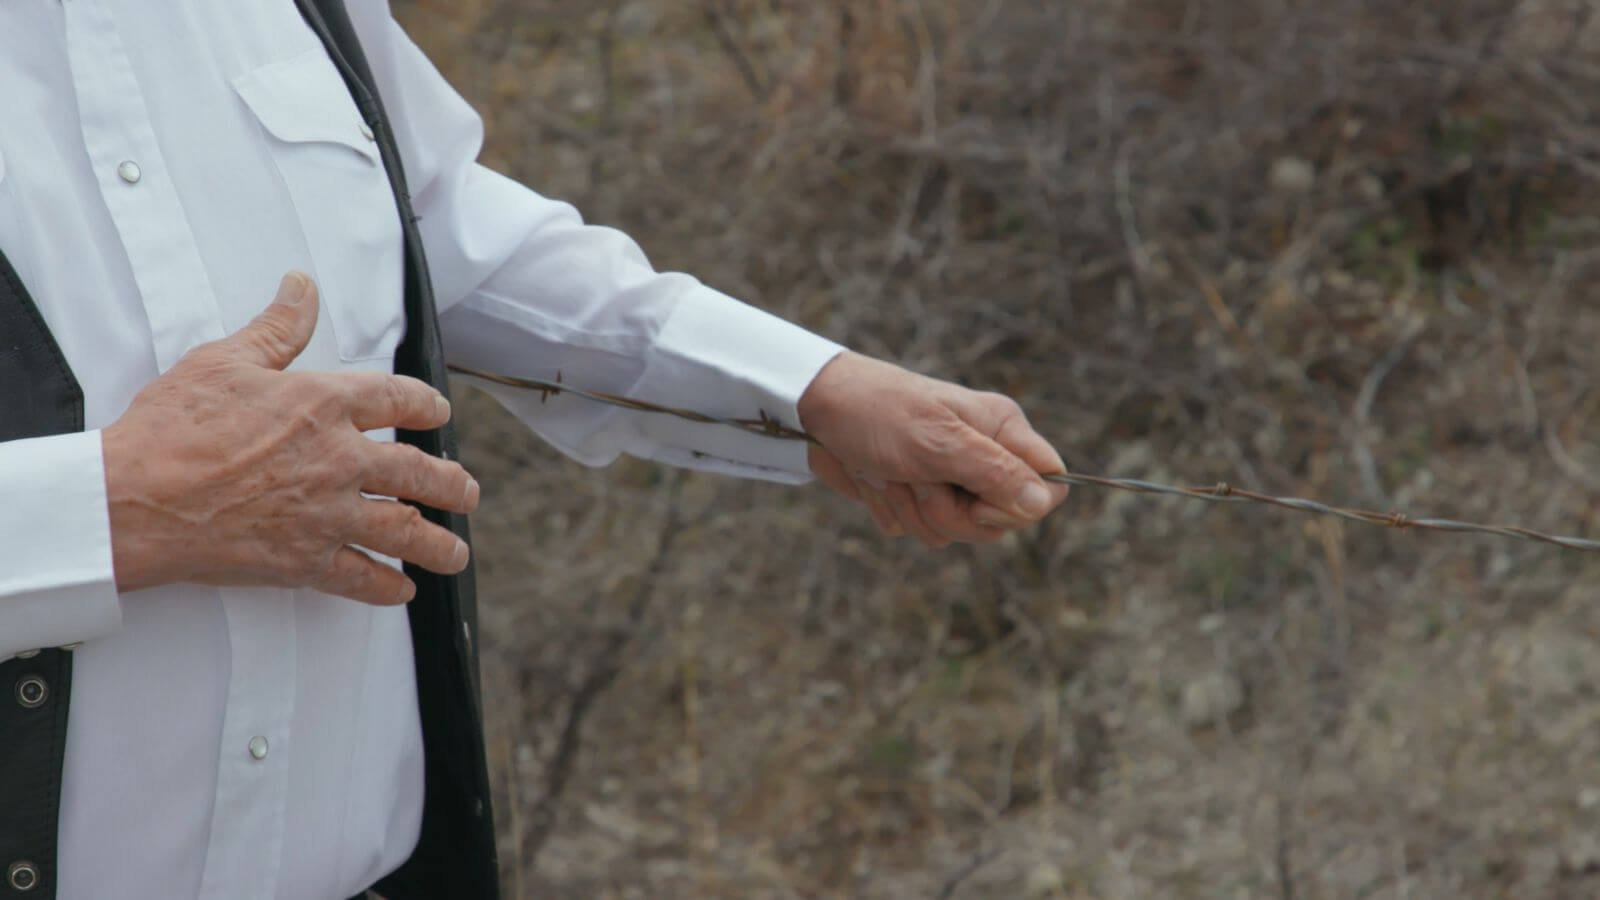 Hands of old man in white shirt and black vest touching a barbed wire fence